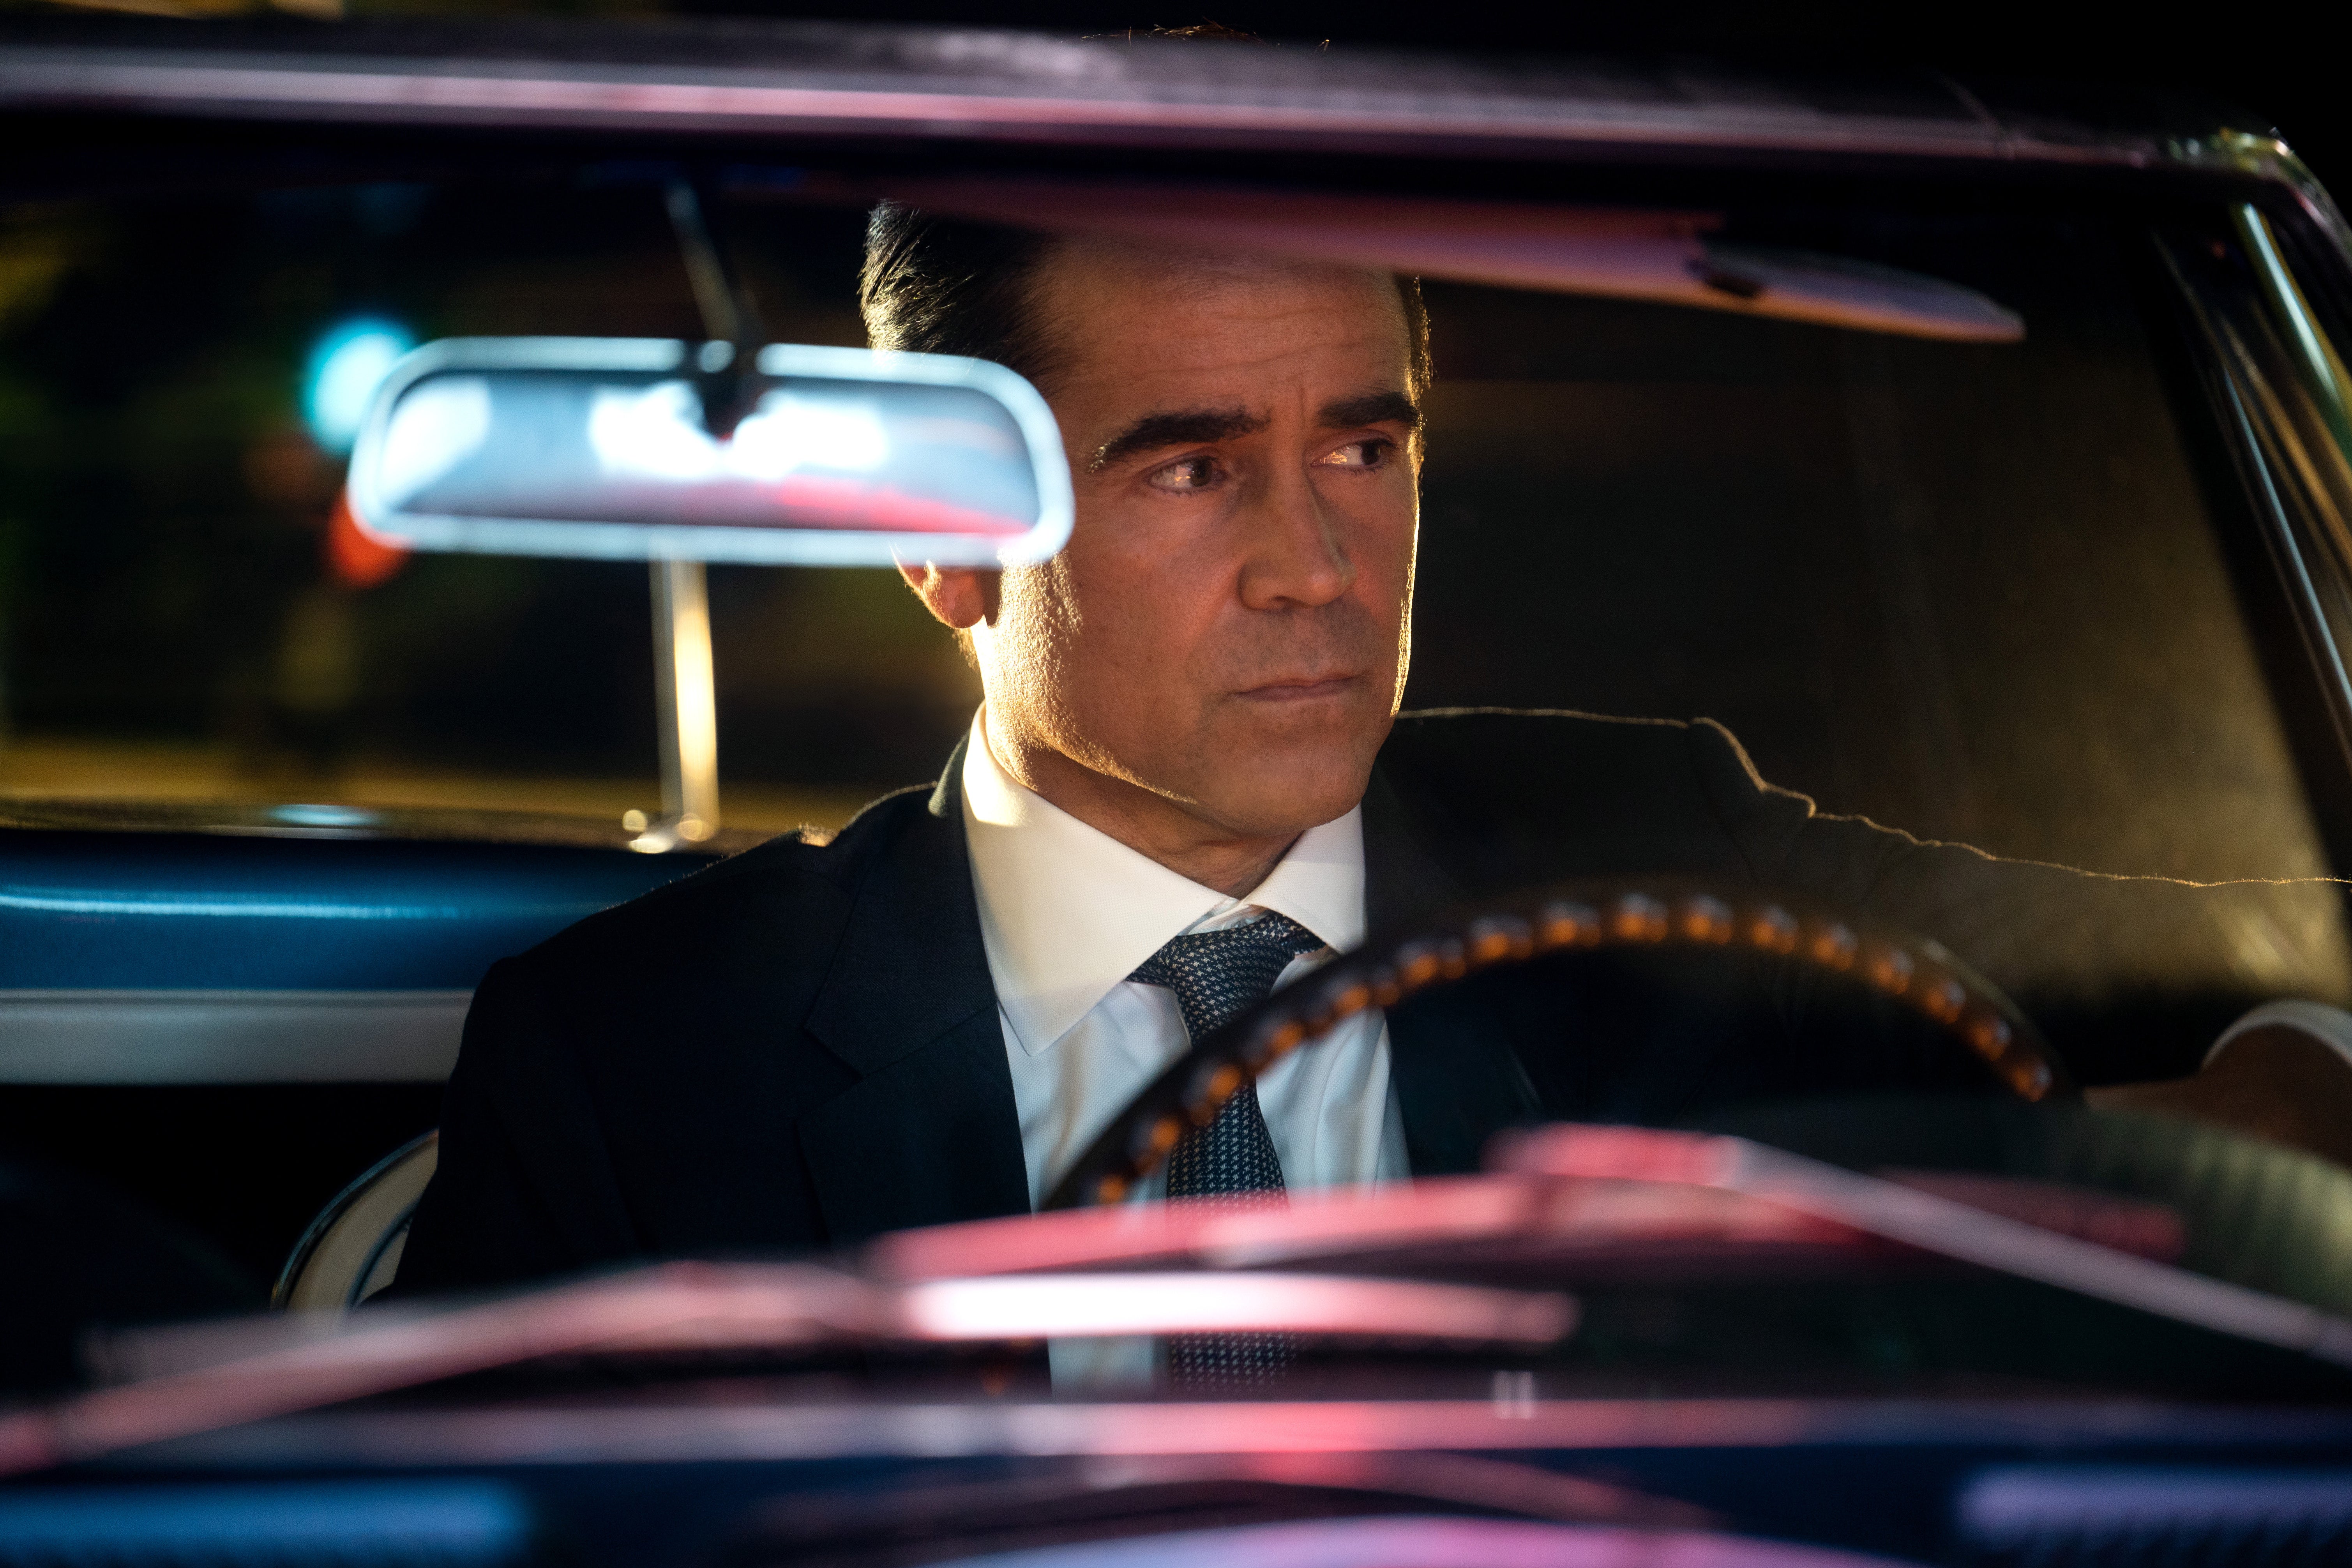 Colin Farrell as Detective Sugar, wearing a suit and driving at night, is lit by neon lights as he looks off to the side. 